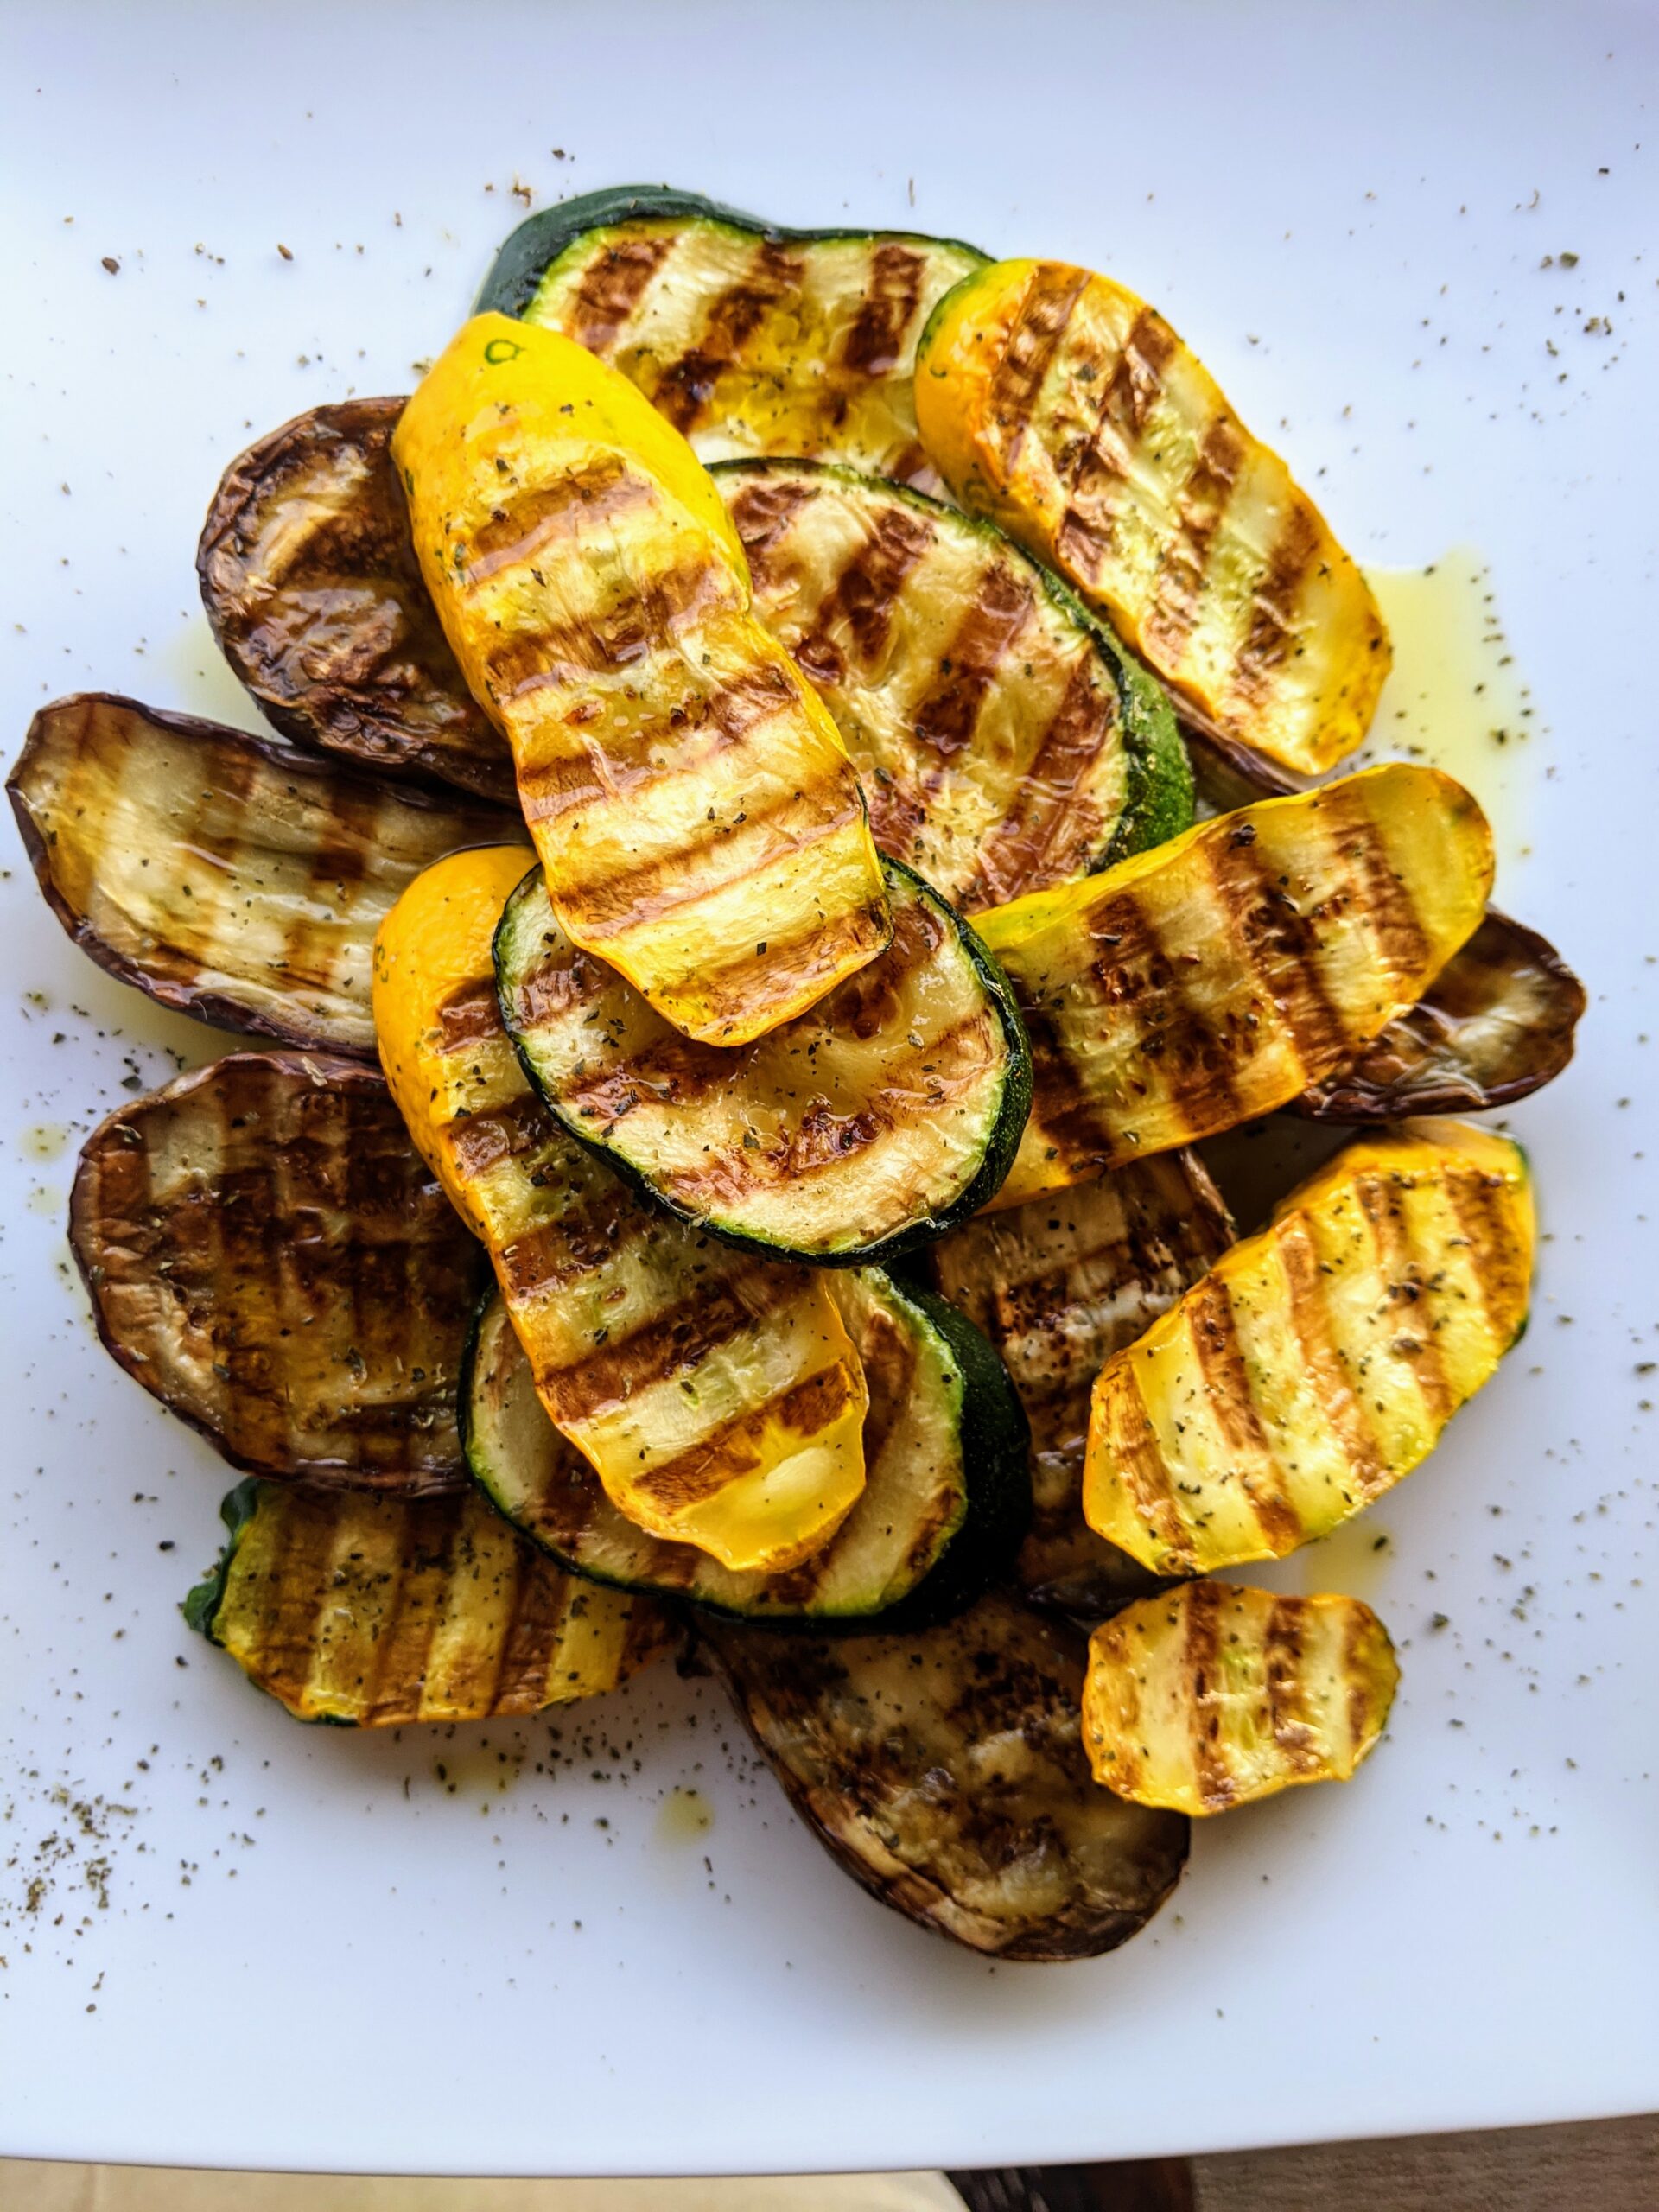 A pile of grilled yellow & green zucchini and eggplant.